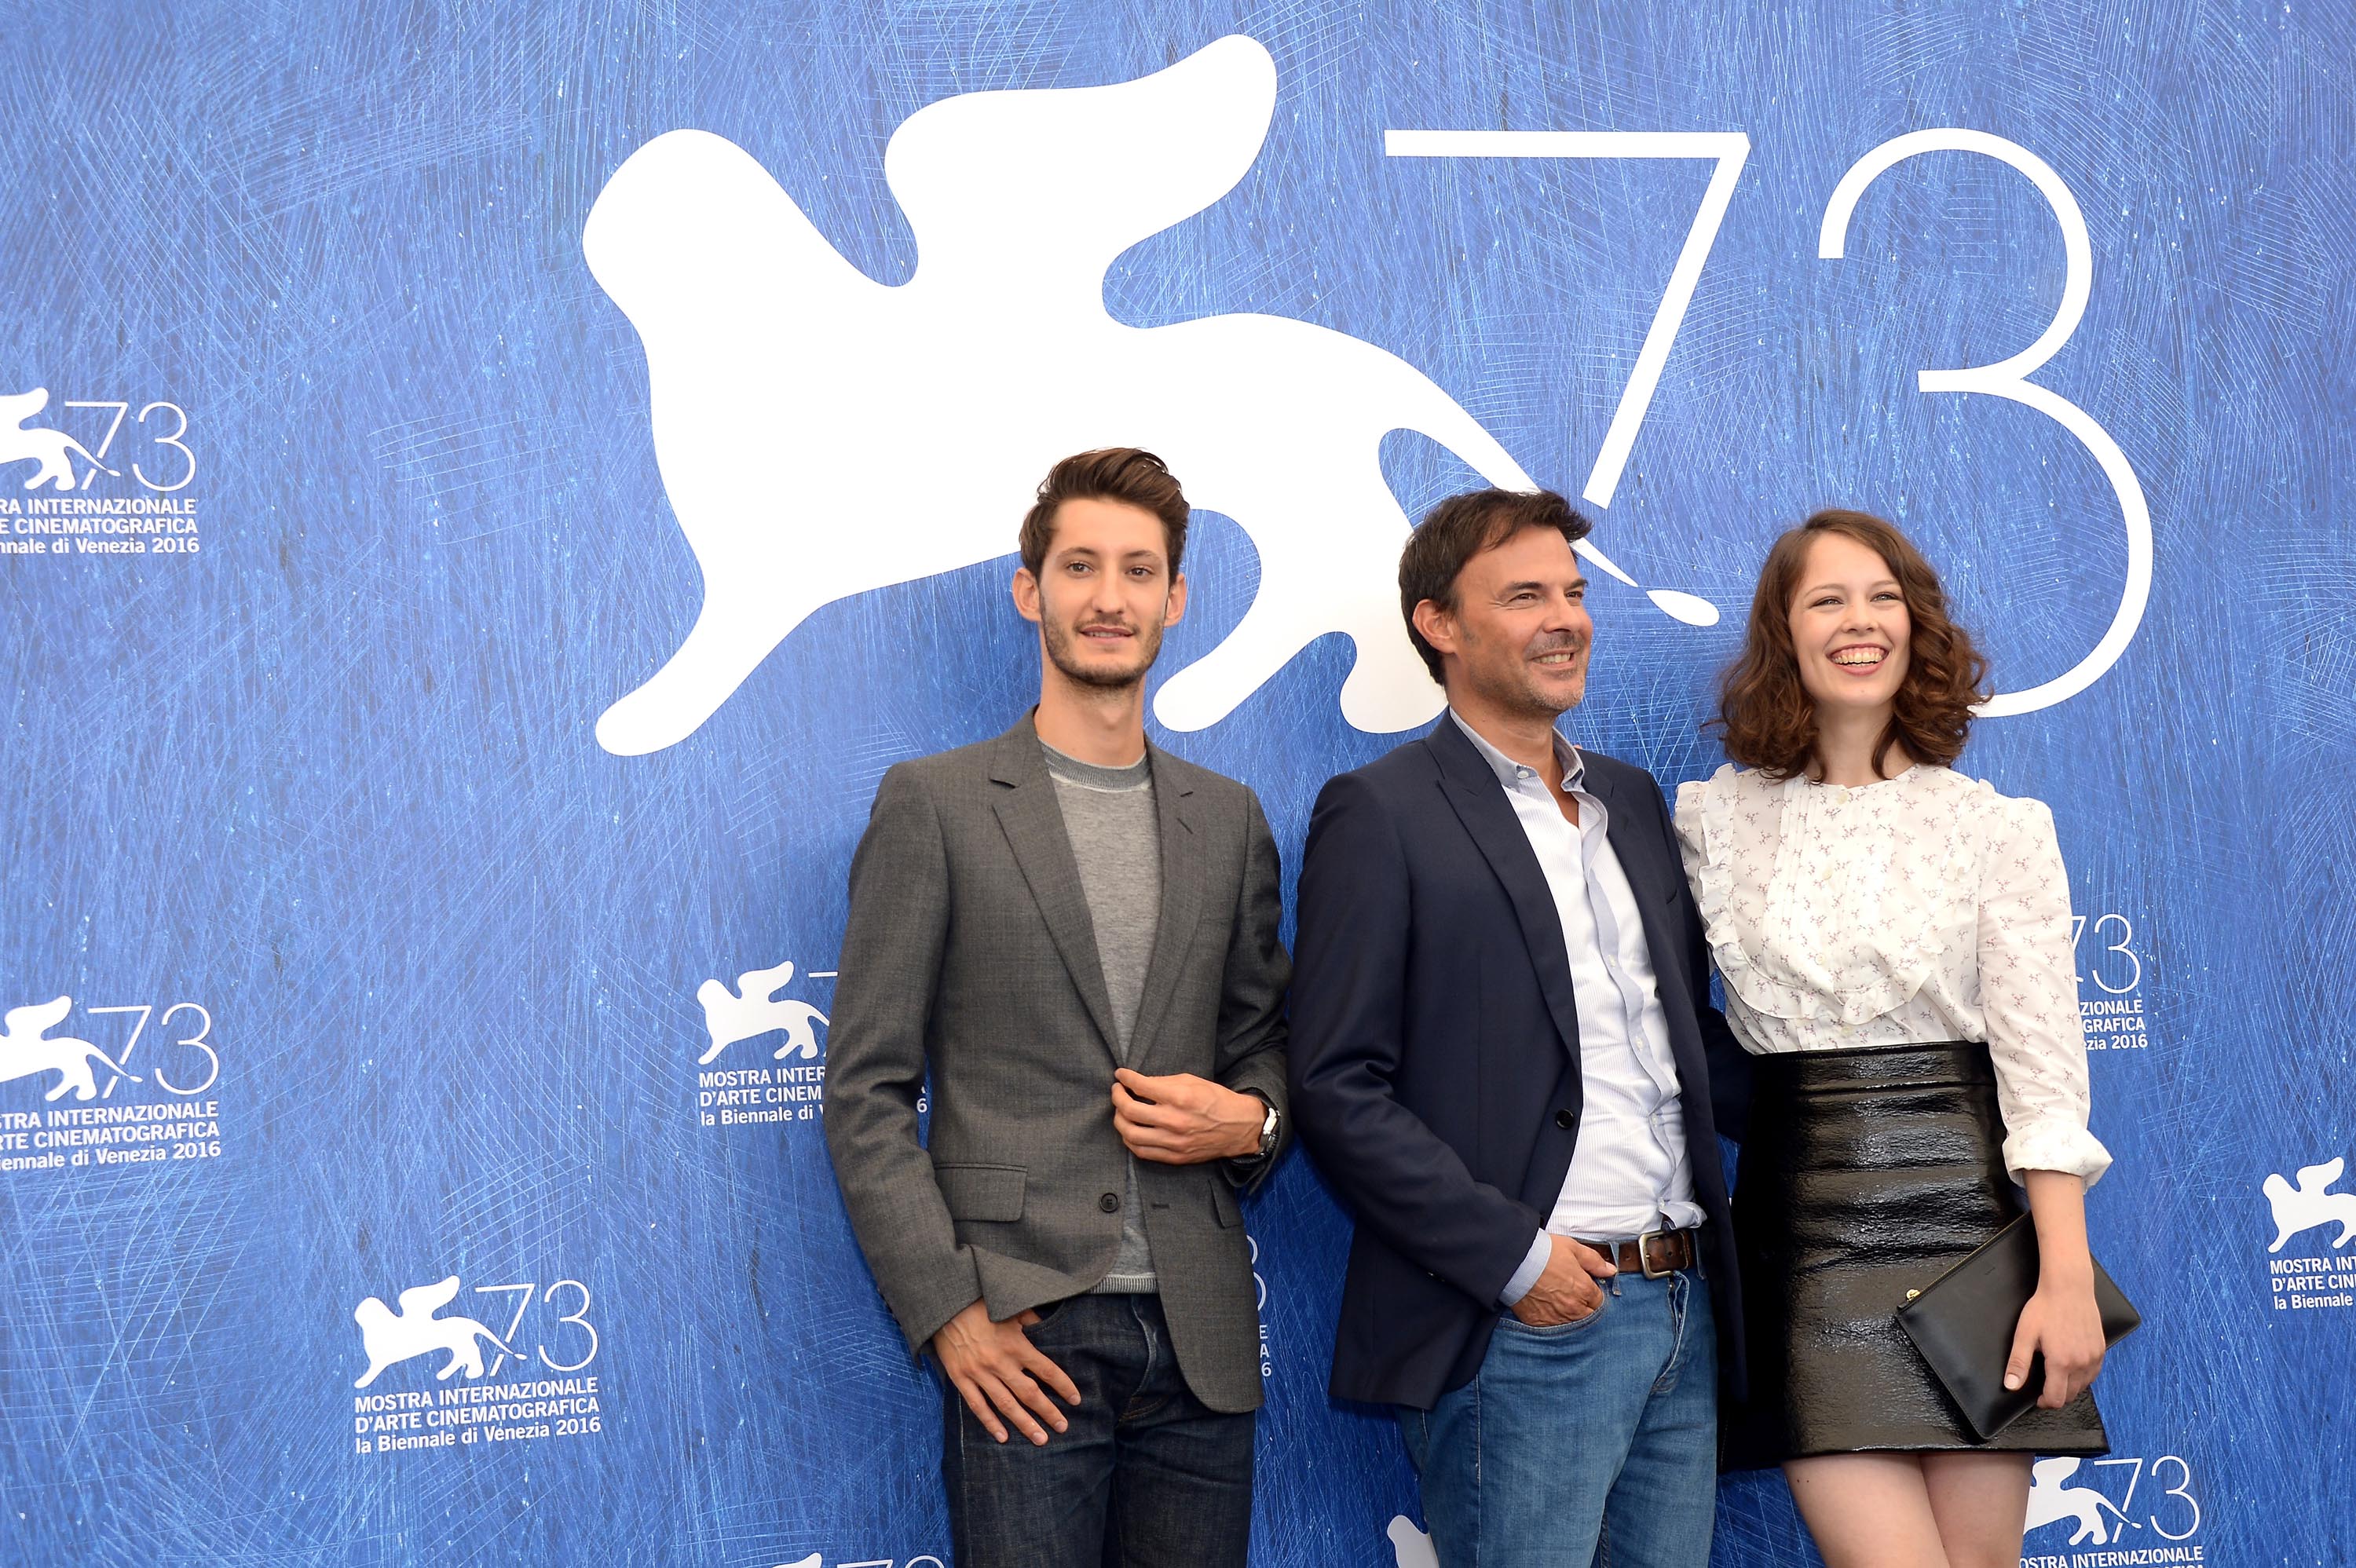 Paula Beer attends the 73rd Venice Film Festival